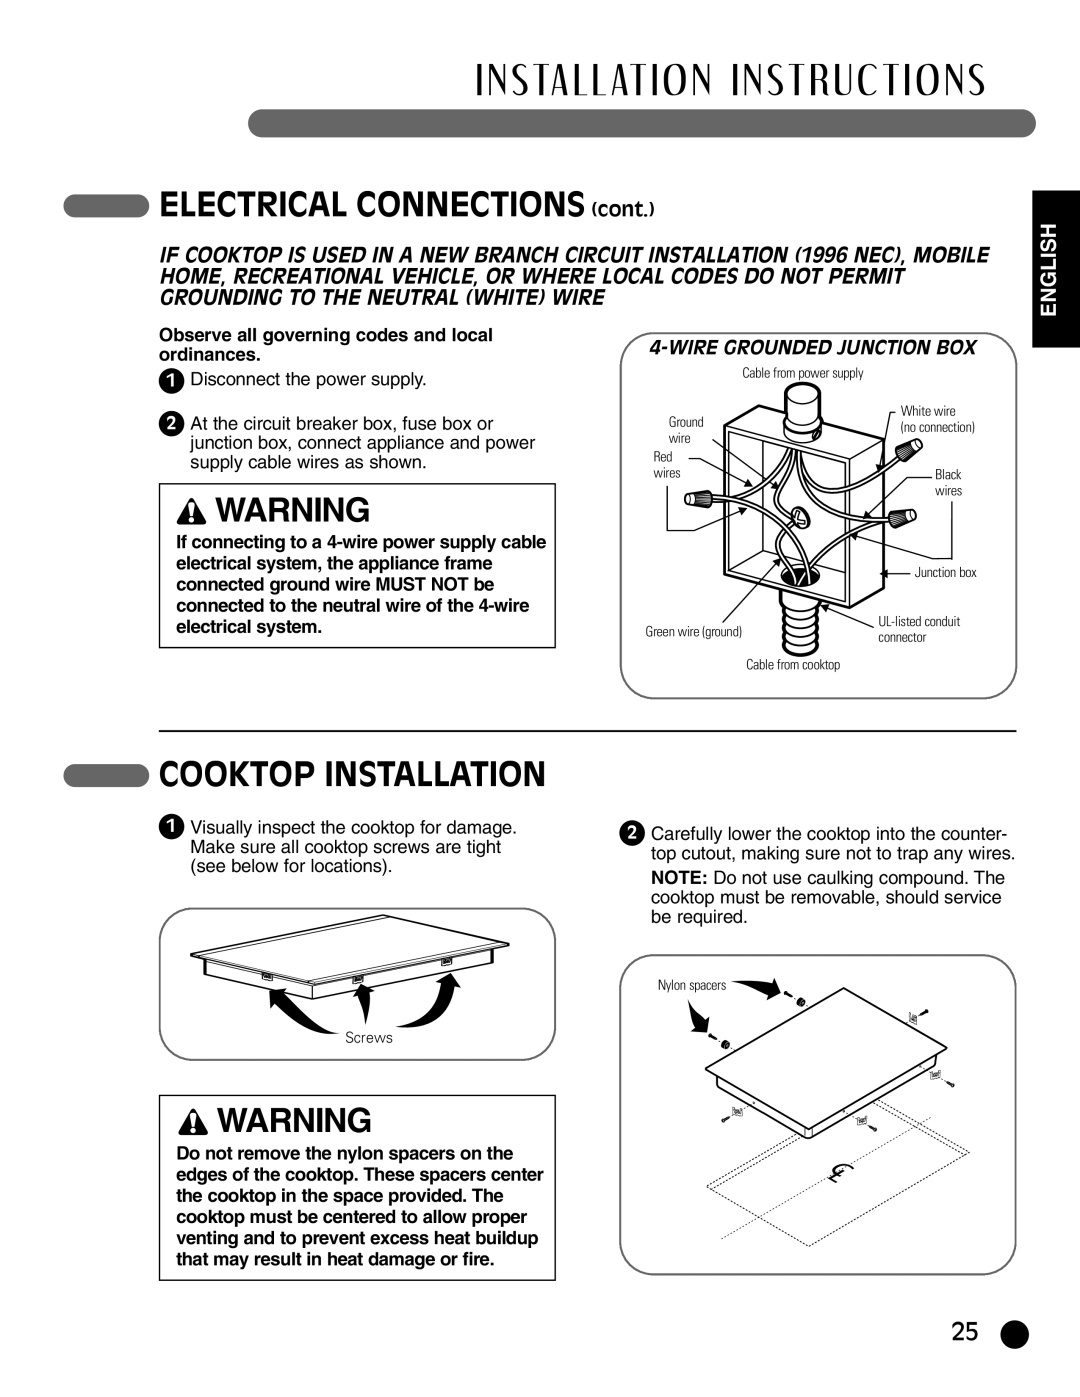 LG Electronics HN7413AG, LCE30845 Cooktop Installation, Wire Grounded Junction Box, ELECTRICAL CONNECTIONS cont, English 